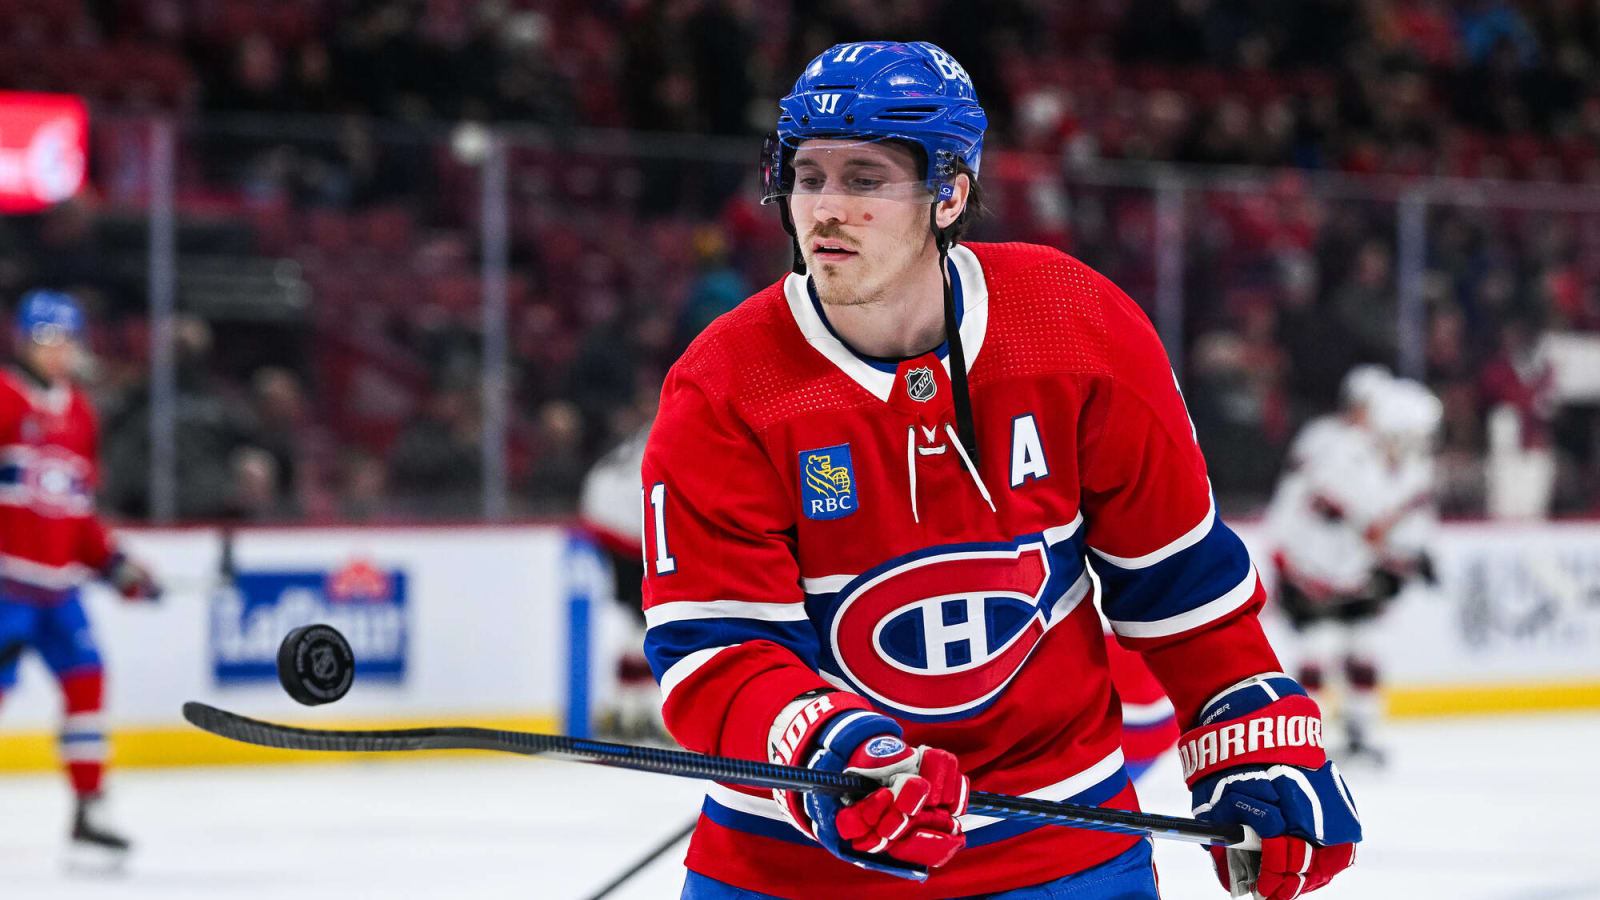 Canadiens’ Gallagher to have hearing with NHL Player Safety for hit on Islanders’ Pelech